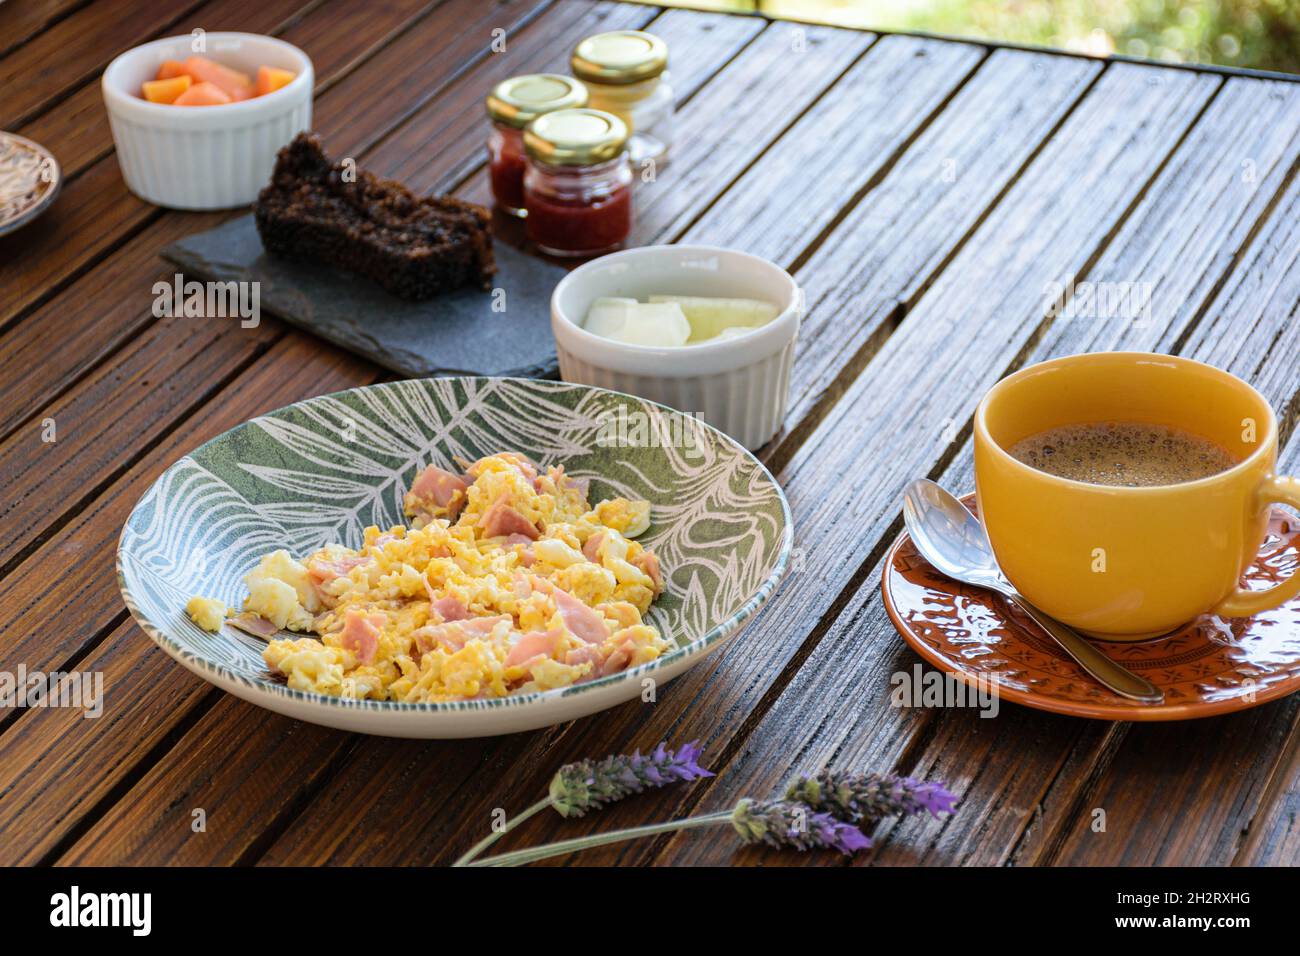 Breakfast. Eggs with ham, cup of coffee, melon portion and cookie cake (side view). Stock Photo